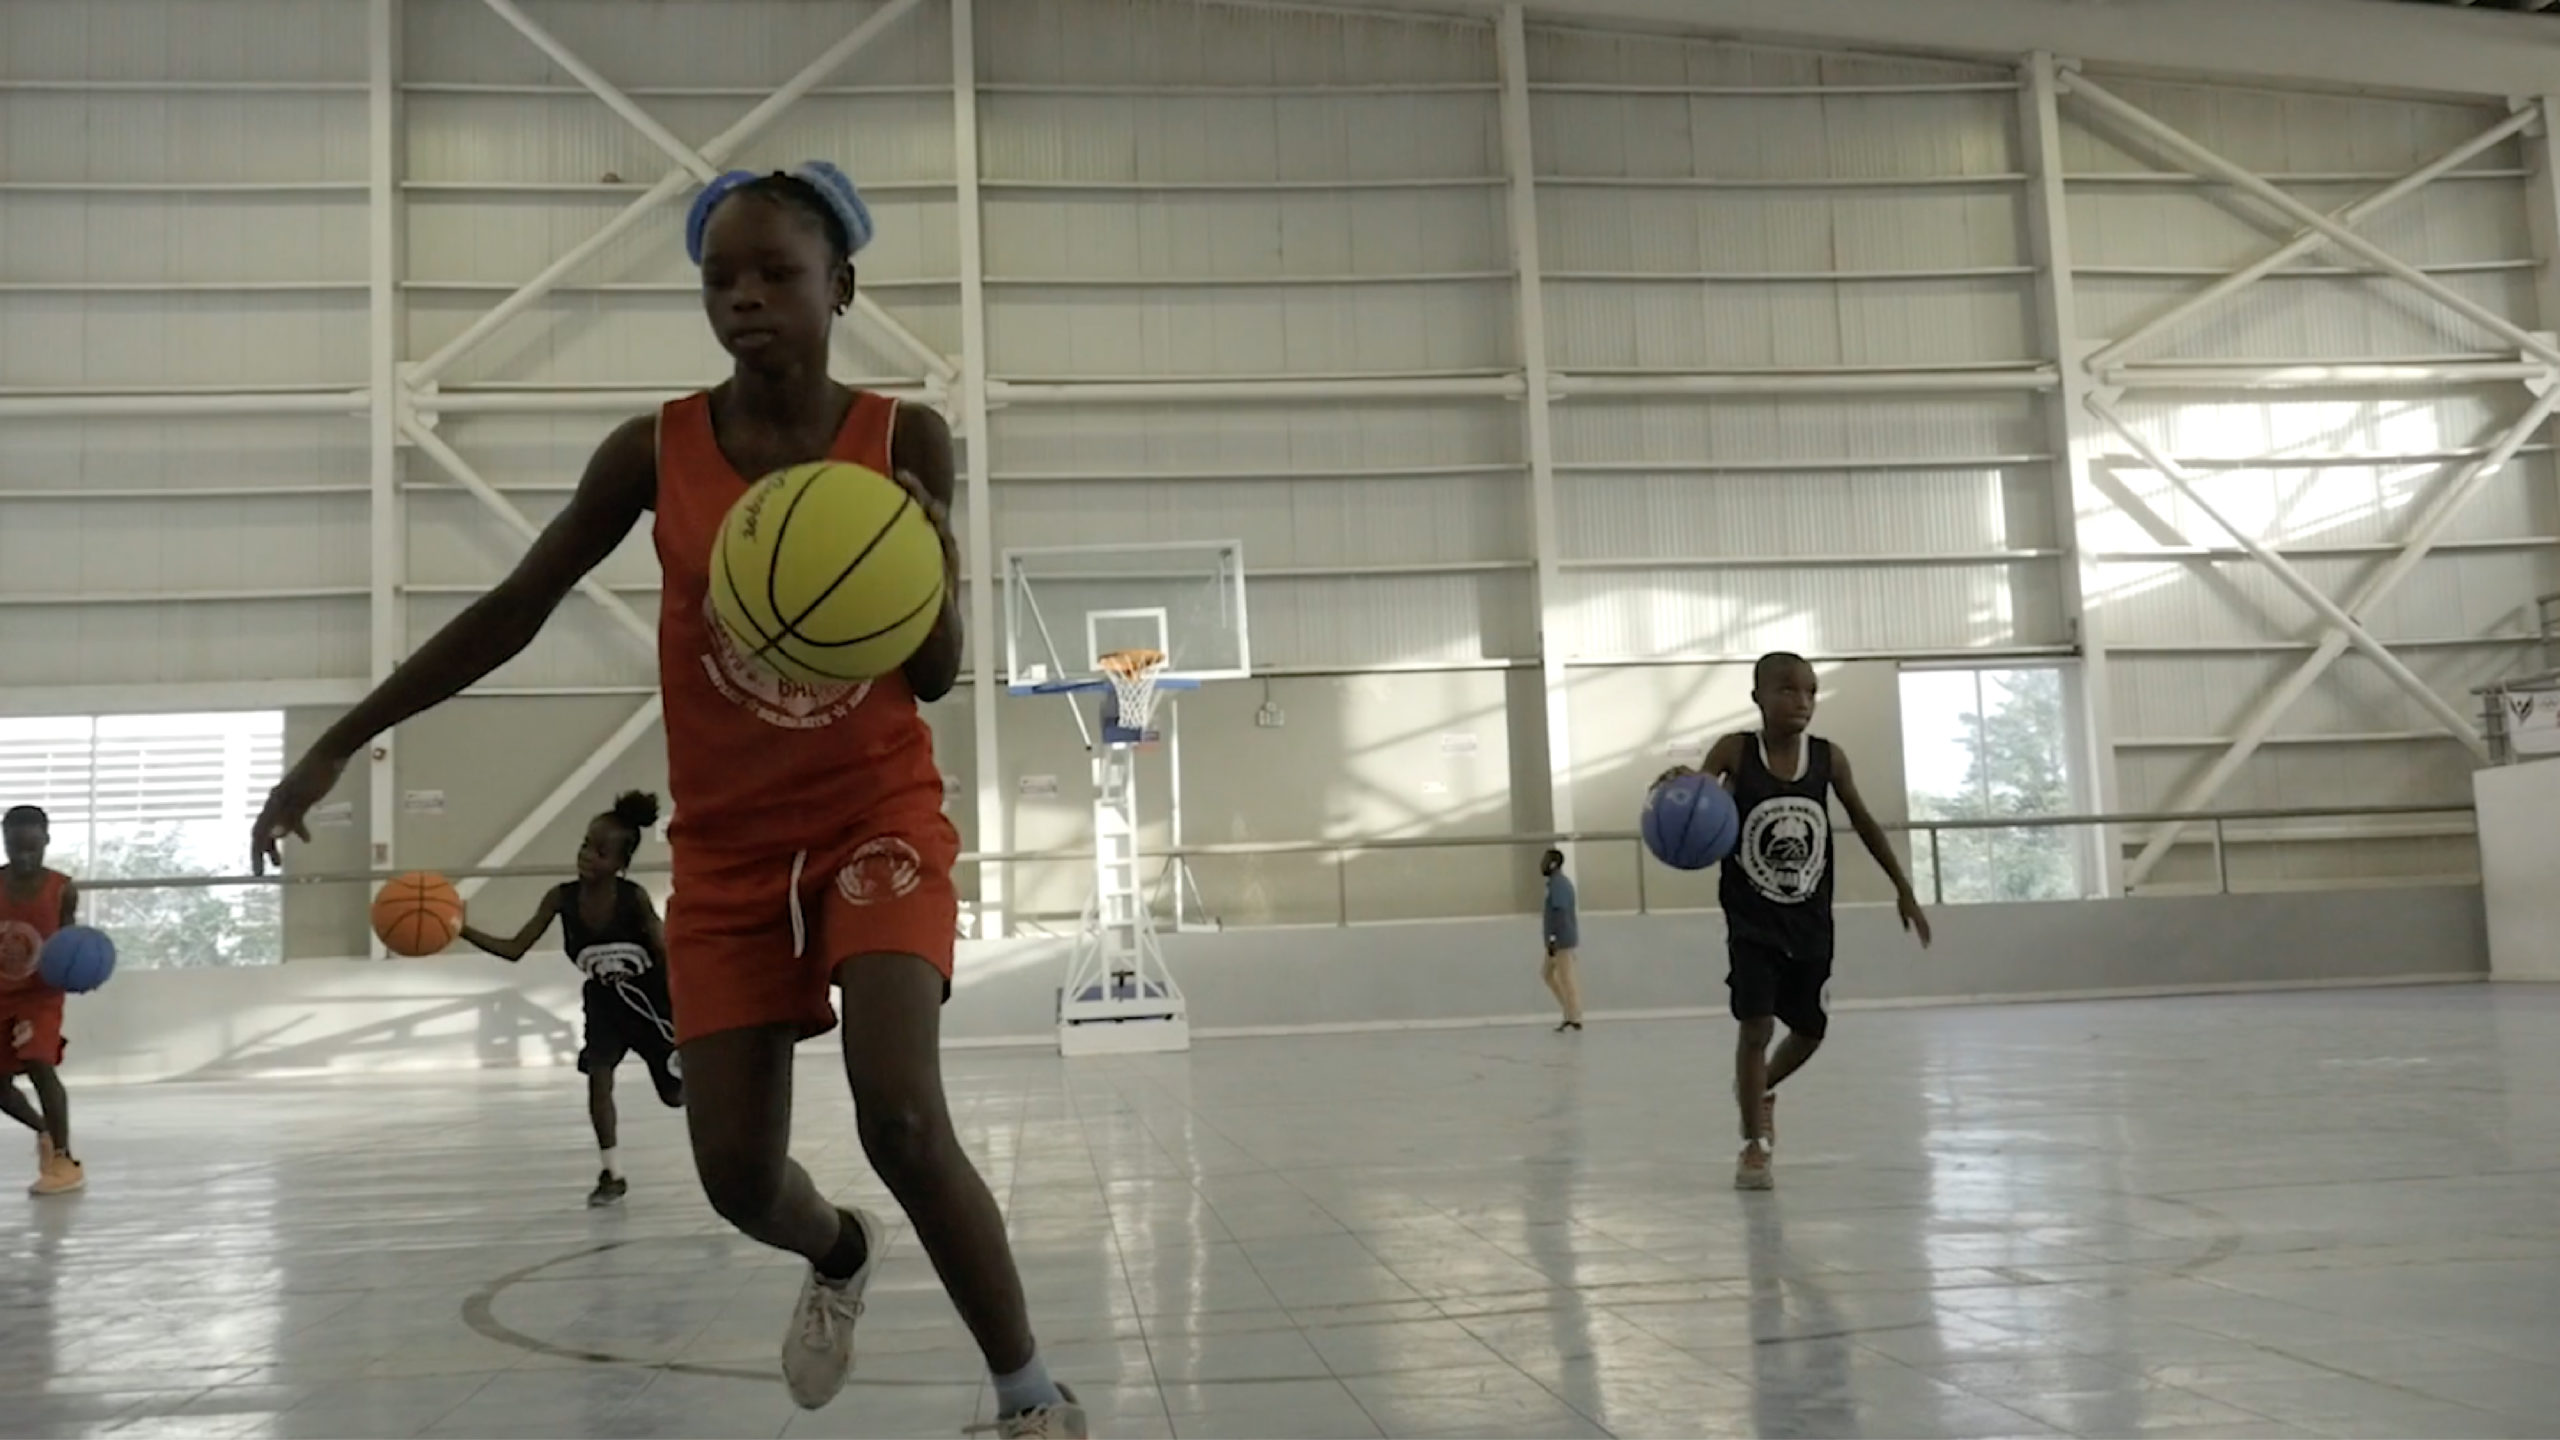 Children practice during a youth development program called Basketball to Uplift the Youth, otherwise known as Baskètbòl pou Ankadre Lajenès (BAL)